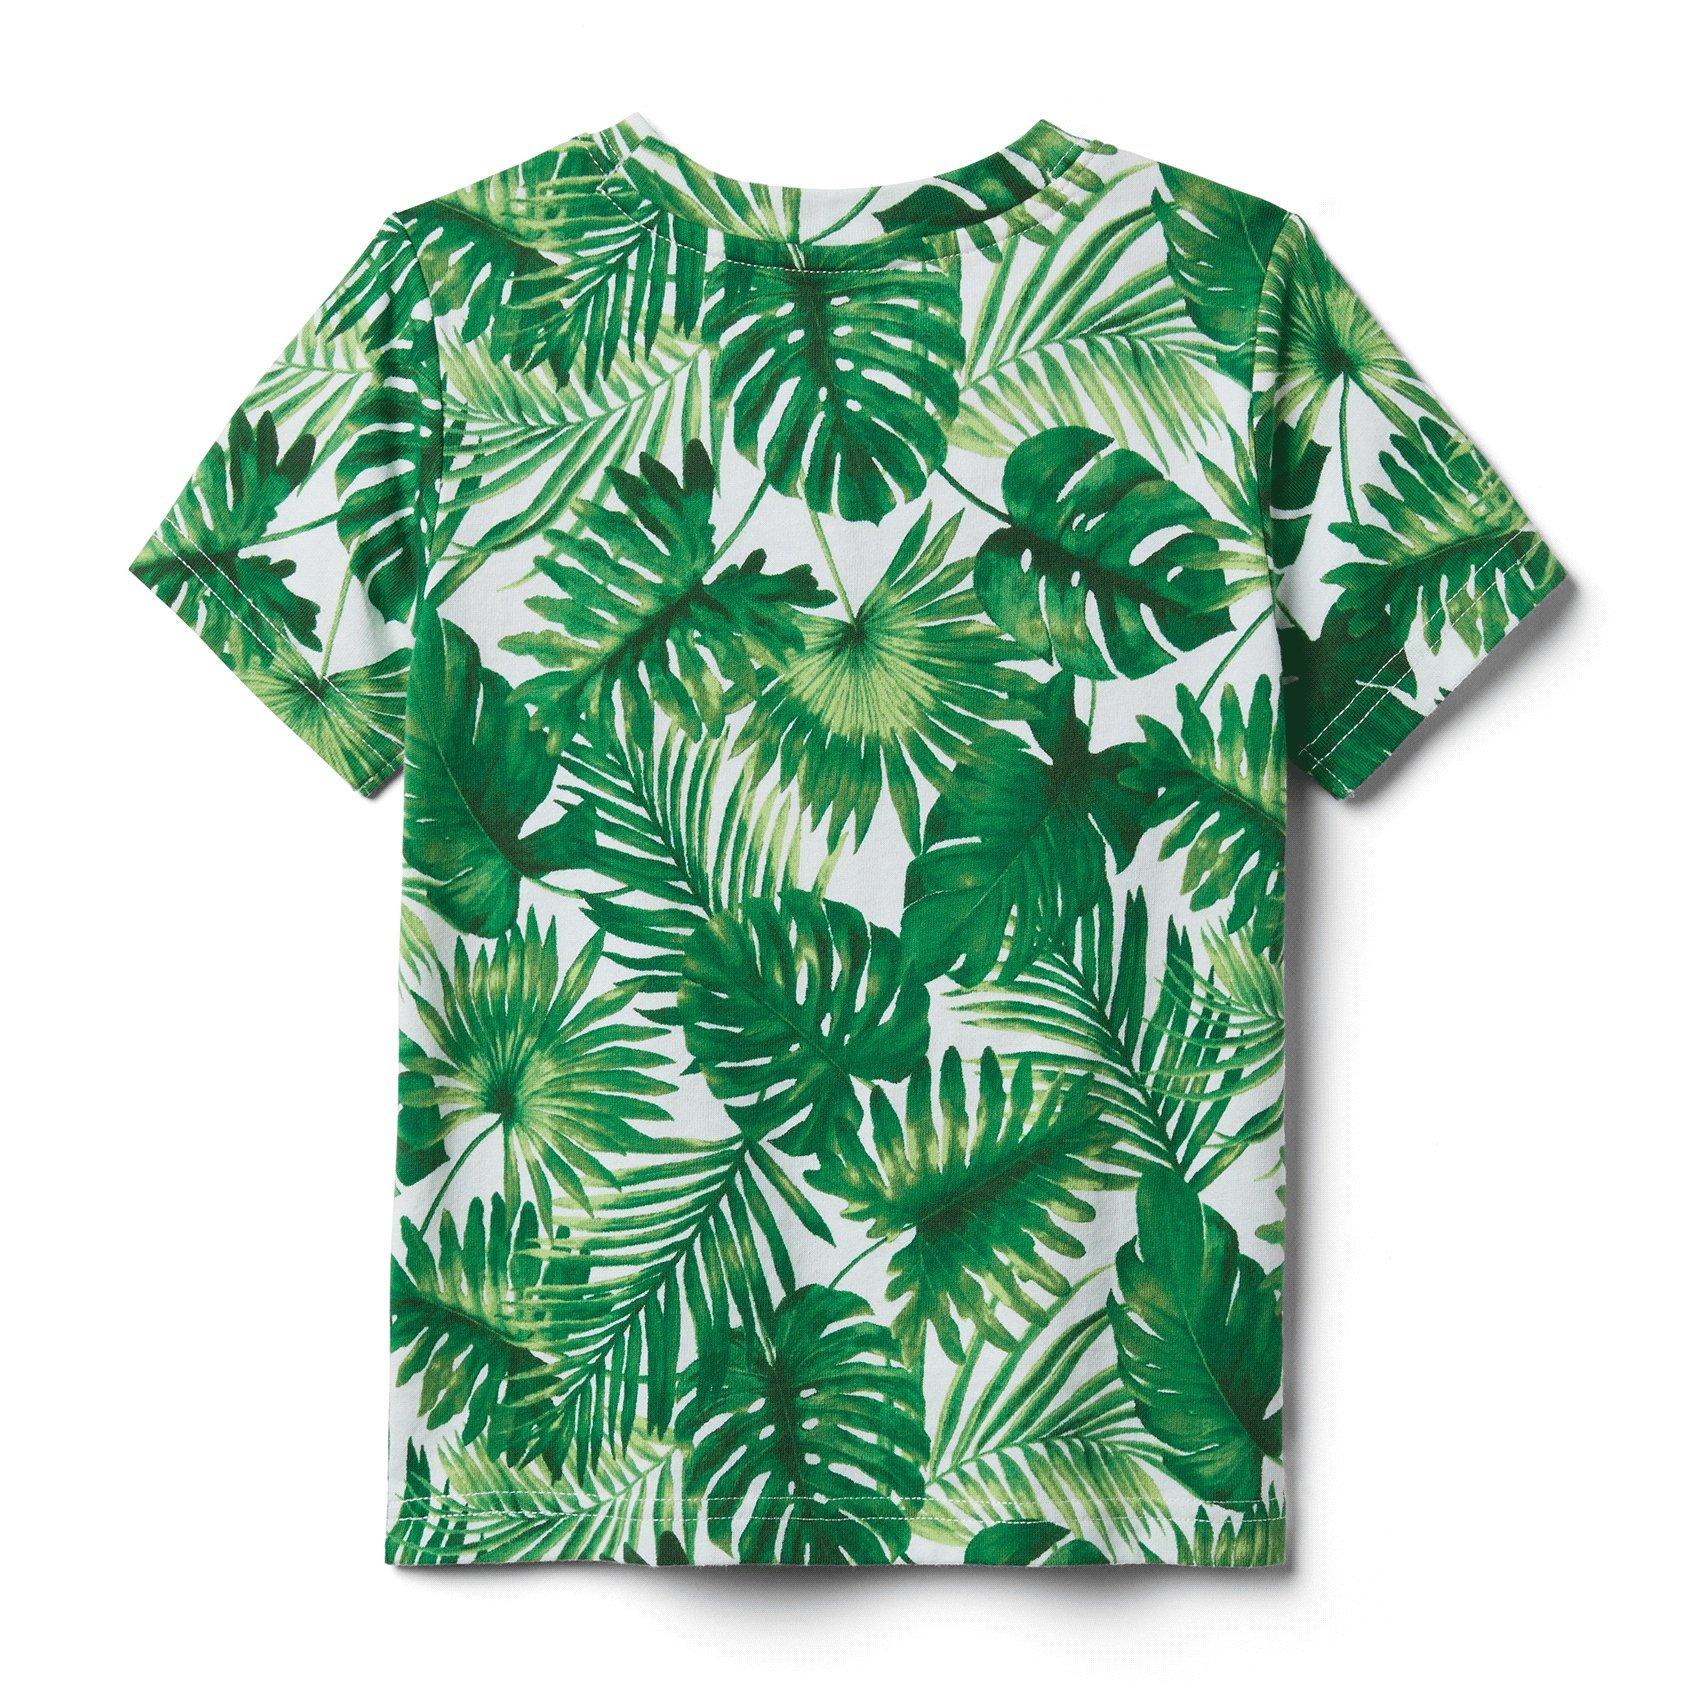 Palm Tee image number 2